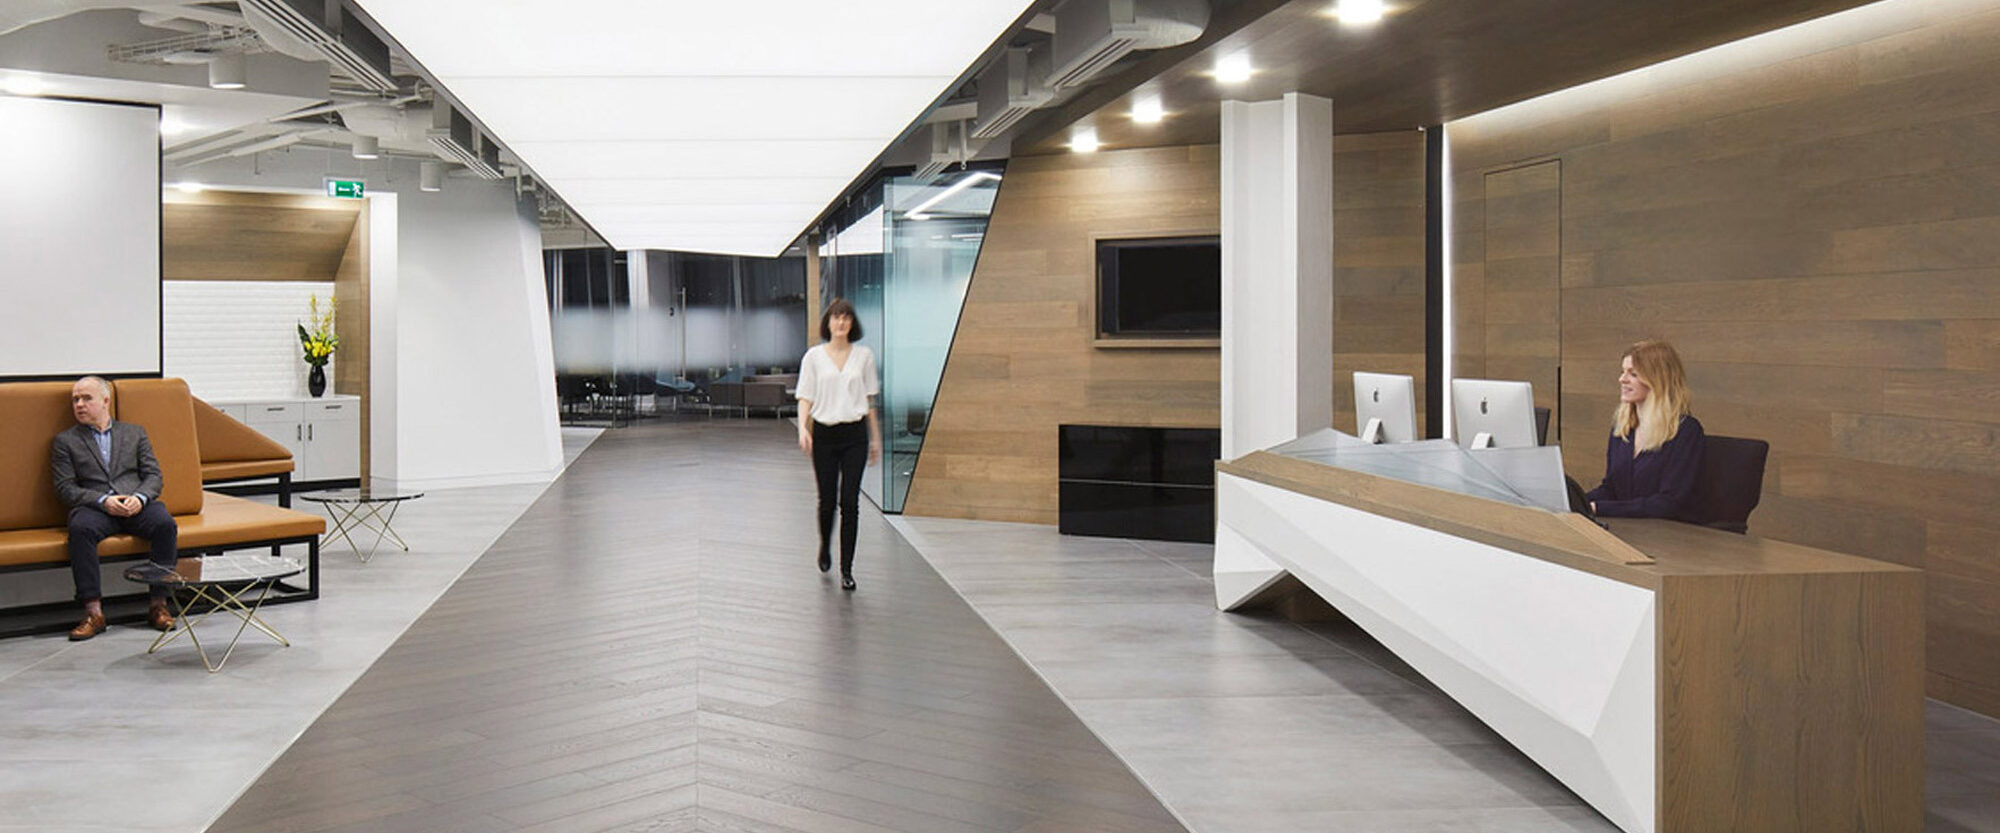 Modern office lobby with minimalist design, featuring a sleek white reception desk, wooden wall panels, herringbone floor pattern, and exposed ceiling, conveying an open and sophisticated space.